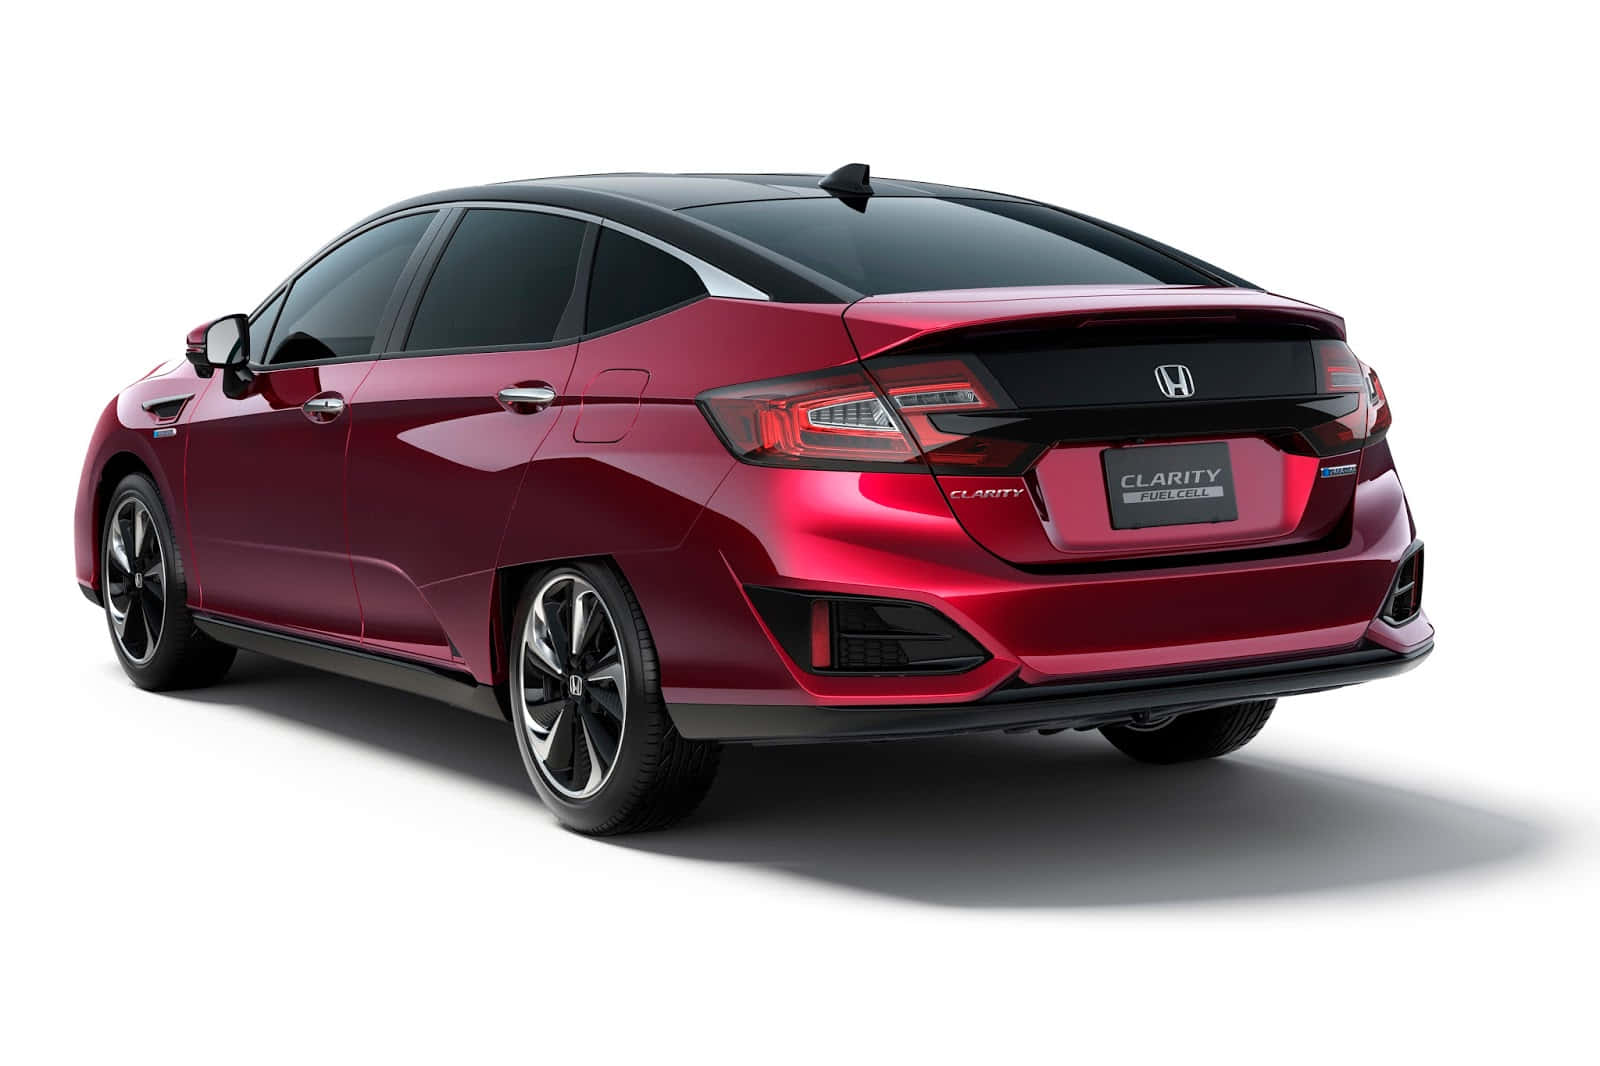 Sleek and eco-friendly, the Honda Clarity is a game-changer - Honda Clarity in a breathtaking outdoor setting Wallpaper